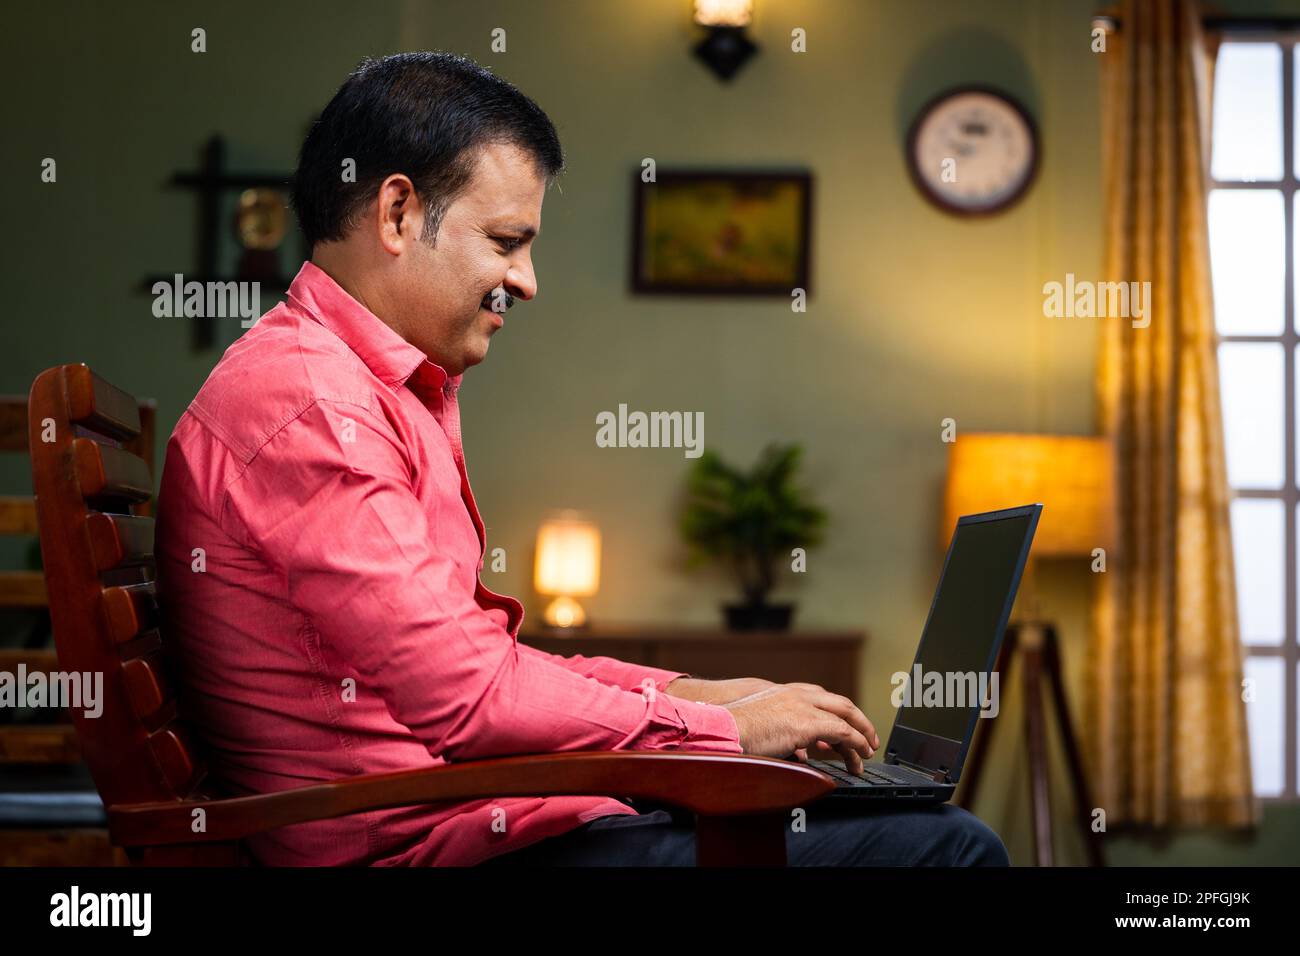 Middle aged man busy working on laptop on chair at home - concept of technology, entrepreneur and surfing internet. Stock Photo